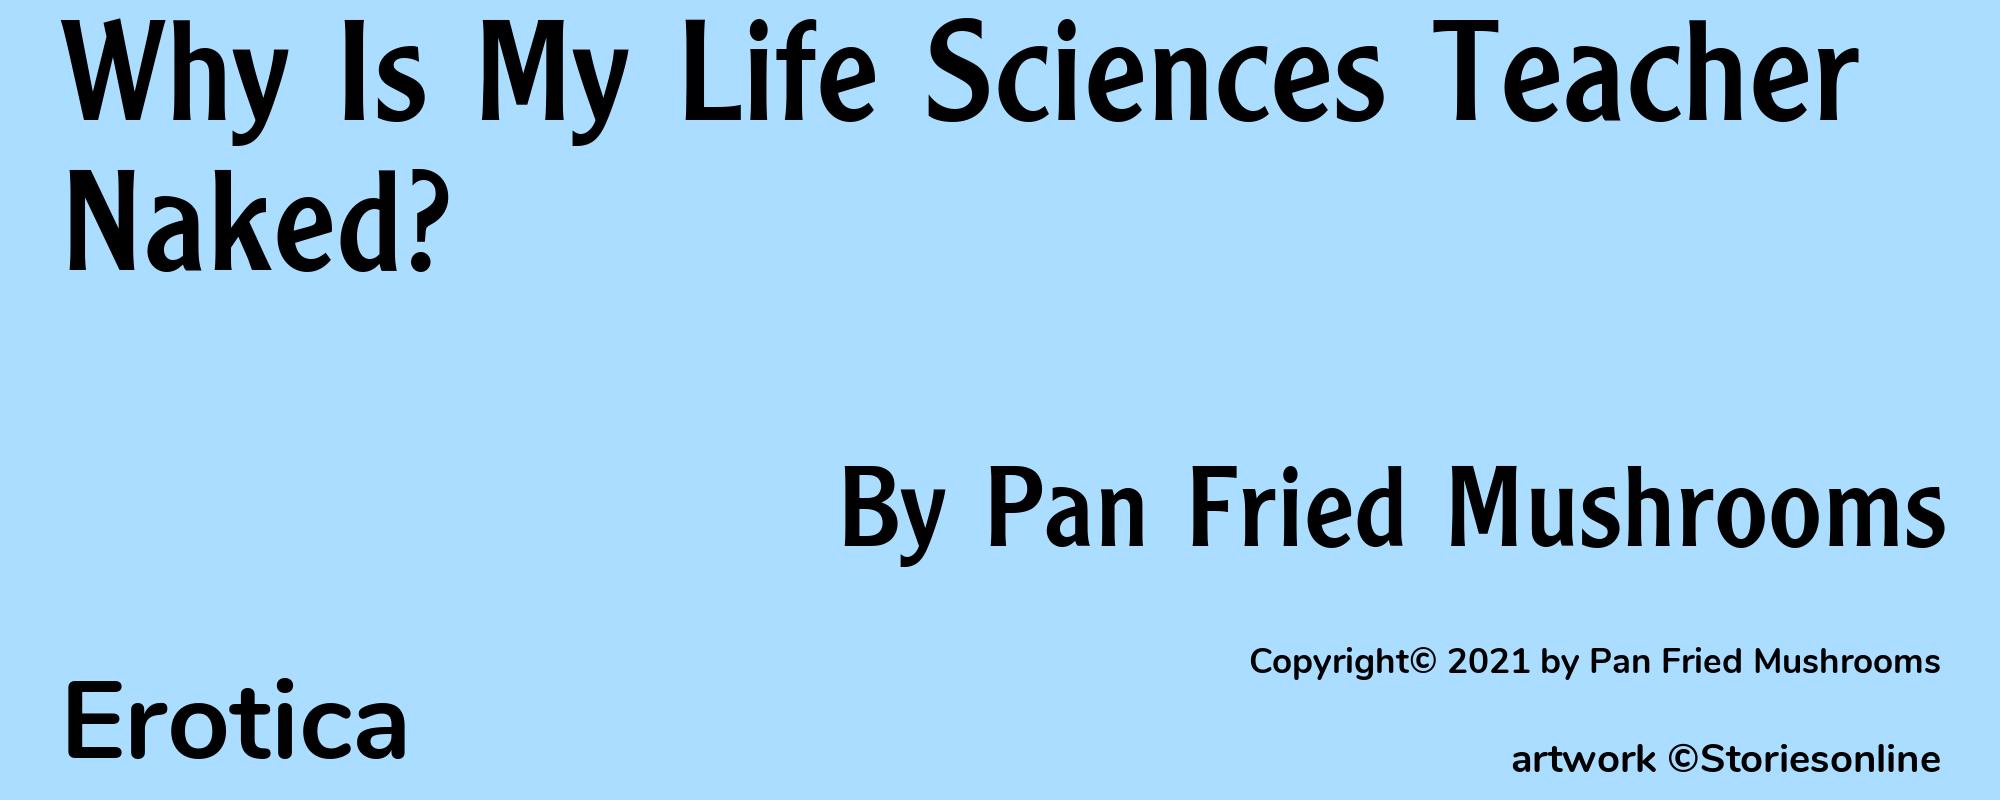 Why Is My Life Sciences Teacher Naked? - Cover